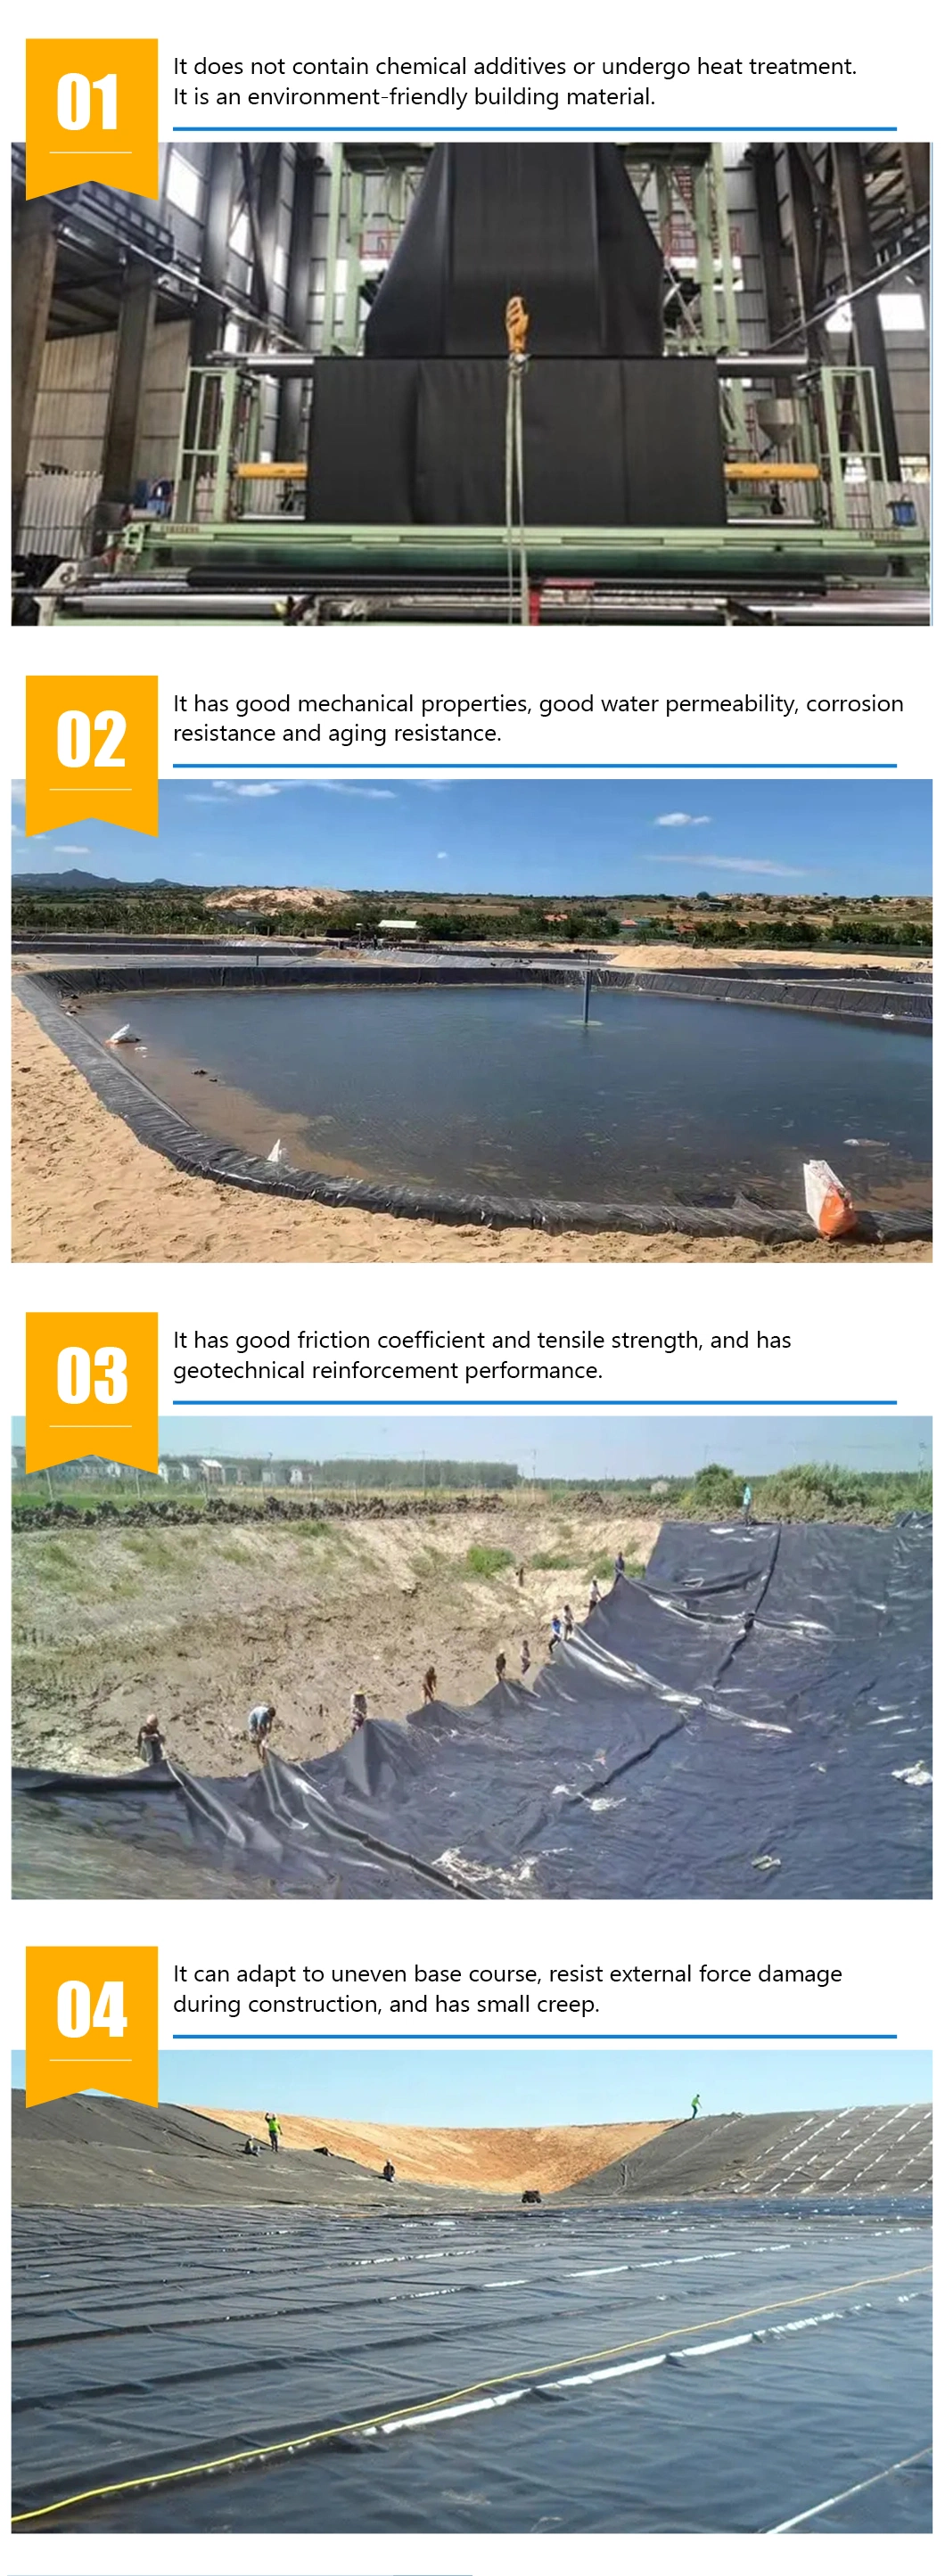 200g-0.4mm-200g Composite Geomembrane with Two Layers Geotextile One Layer Geomembrane for Fish Ponds/Shrimp Ponds/Artificial Lakes/Reservoirs